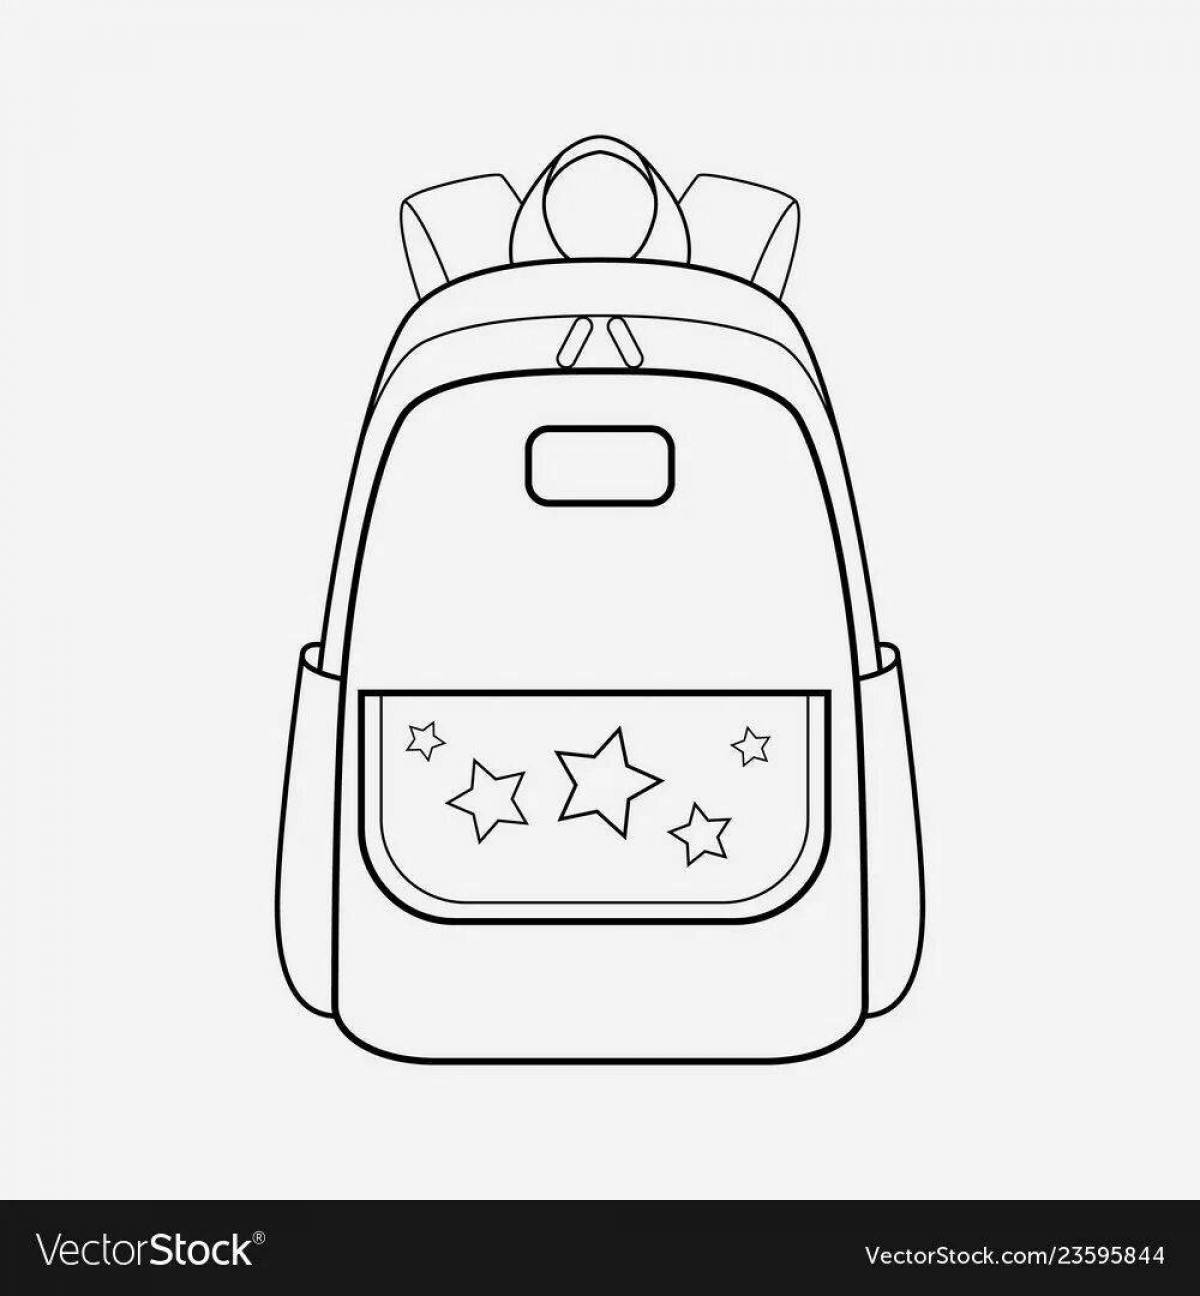 Sweet briefcase coloring for babies